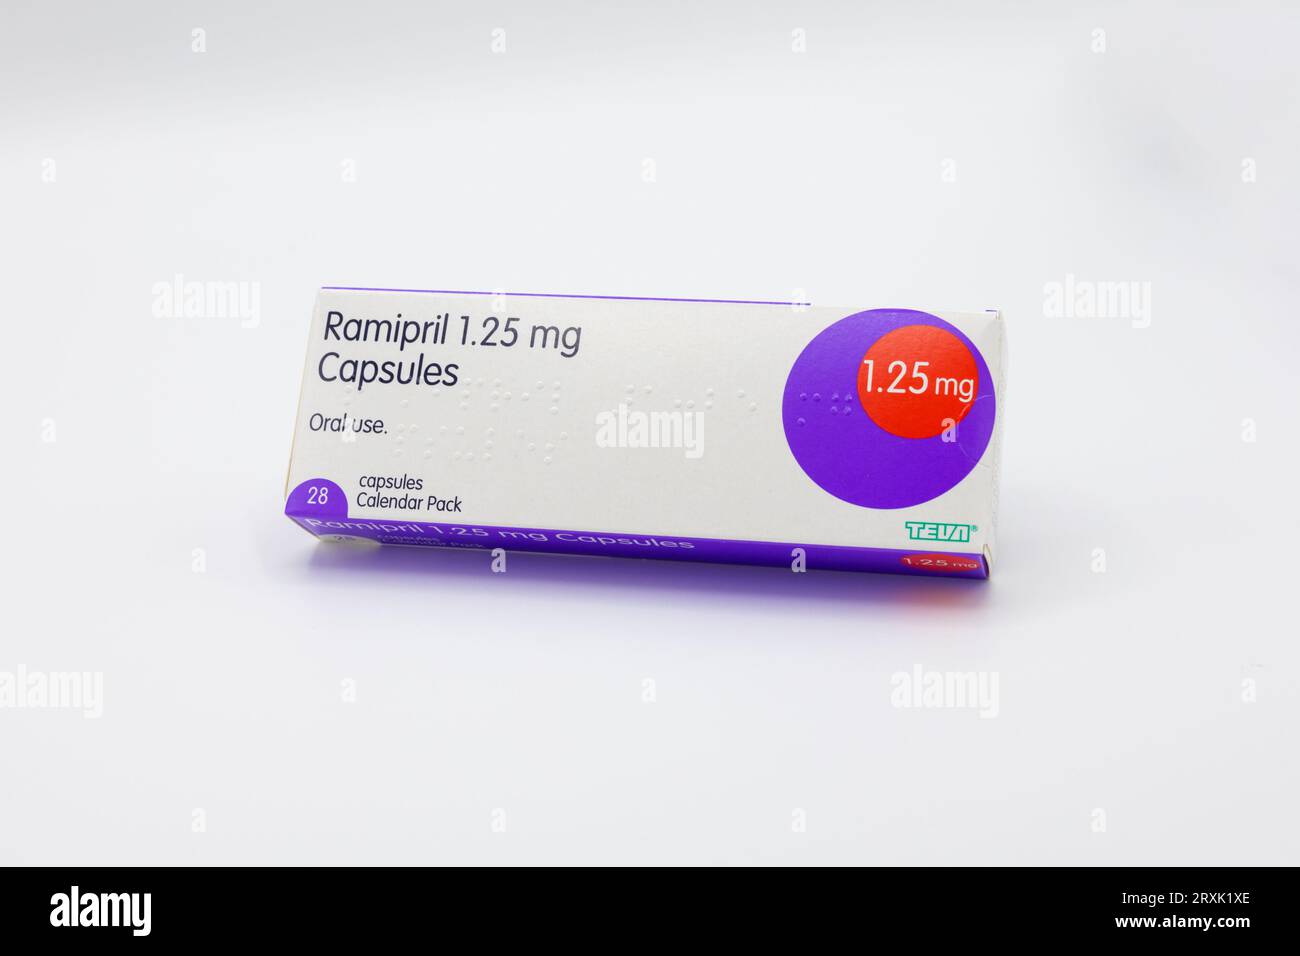 Ramipril 1.25 mg capsules, high blood pressure pills, uk PHOTO ONLY NO PRODUCT SENT Stock Photo